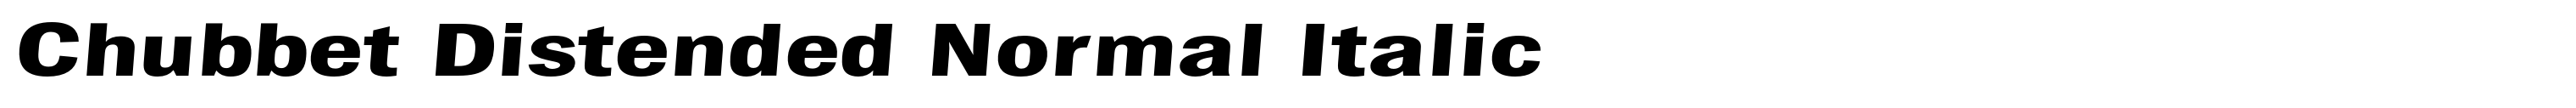 Chubbet Distended Normal Italic